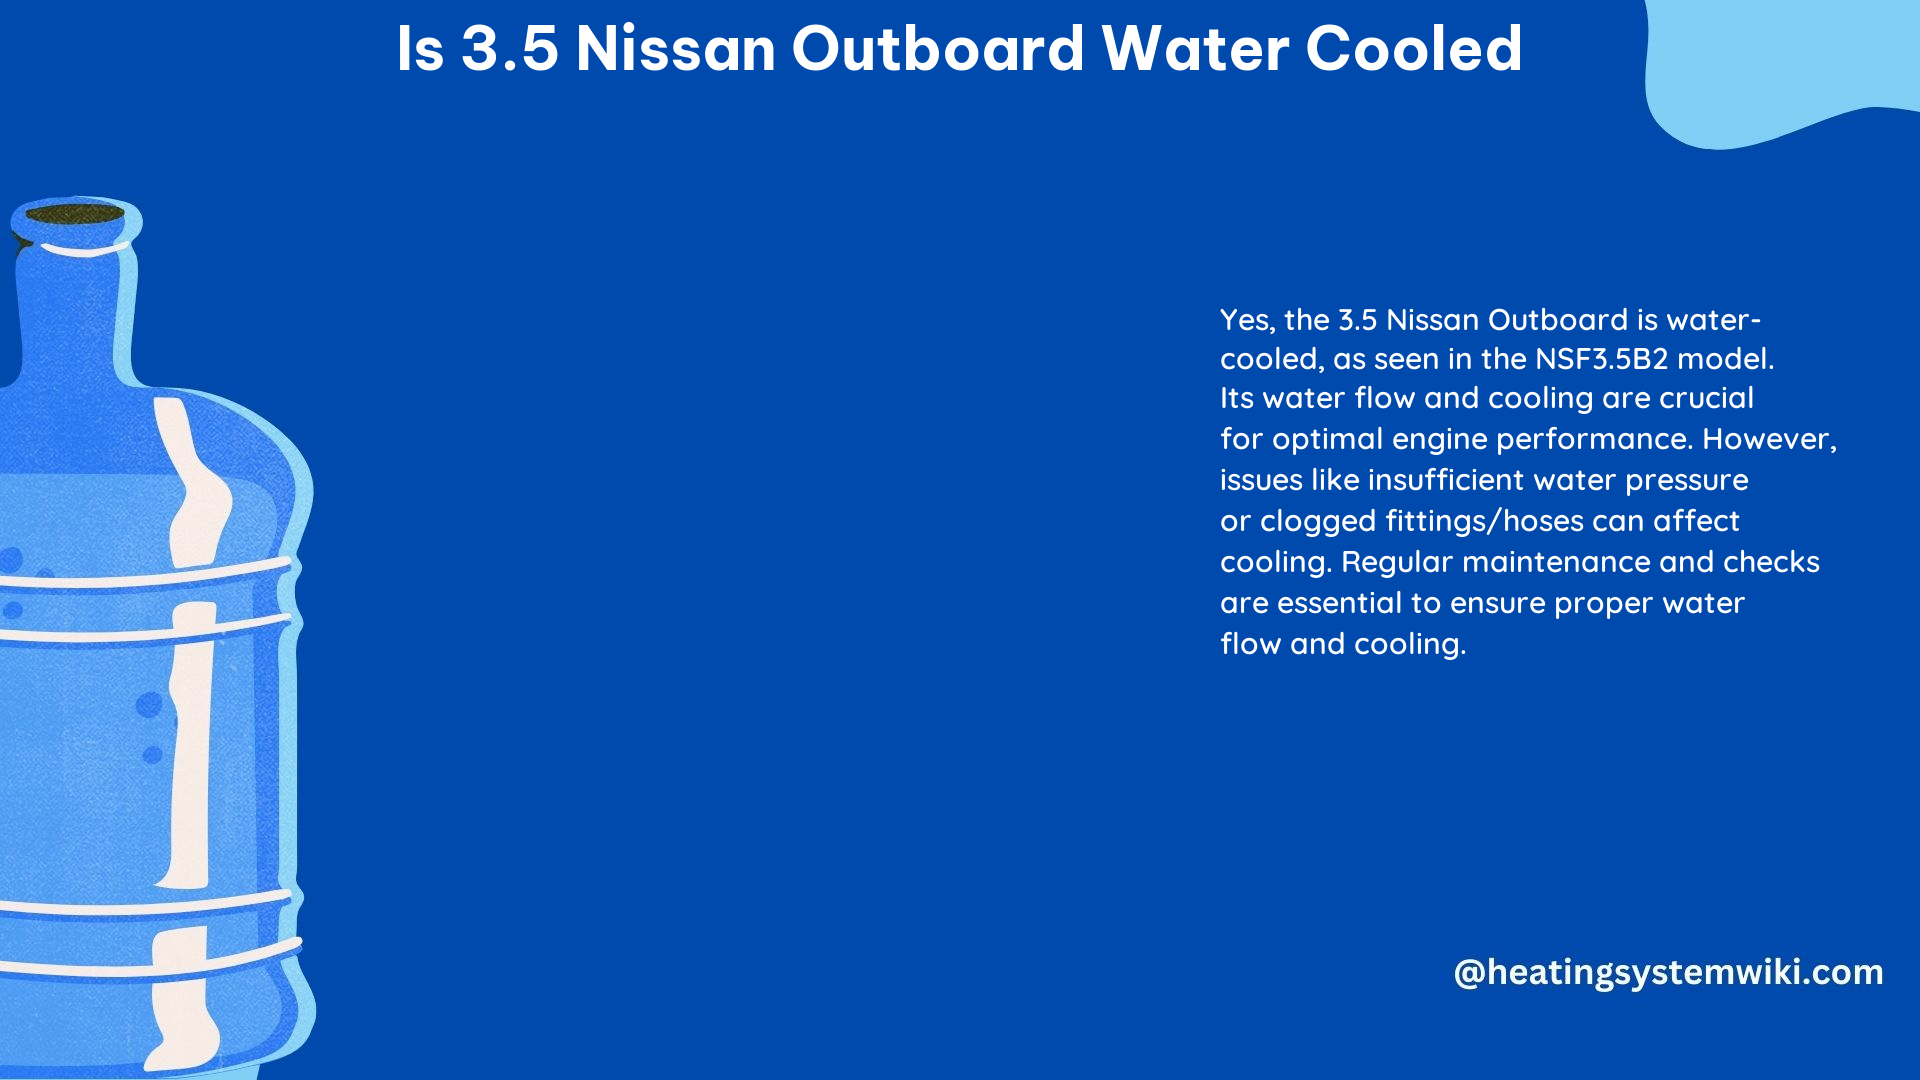 Is 3.5 Nissan Outboard Water Cooled